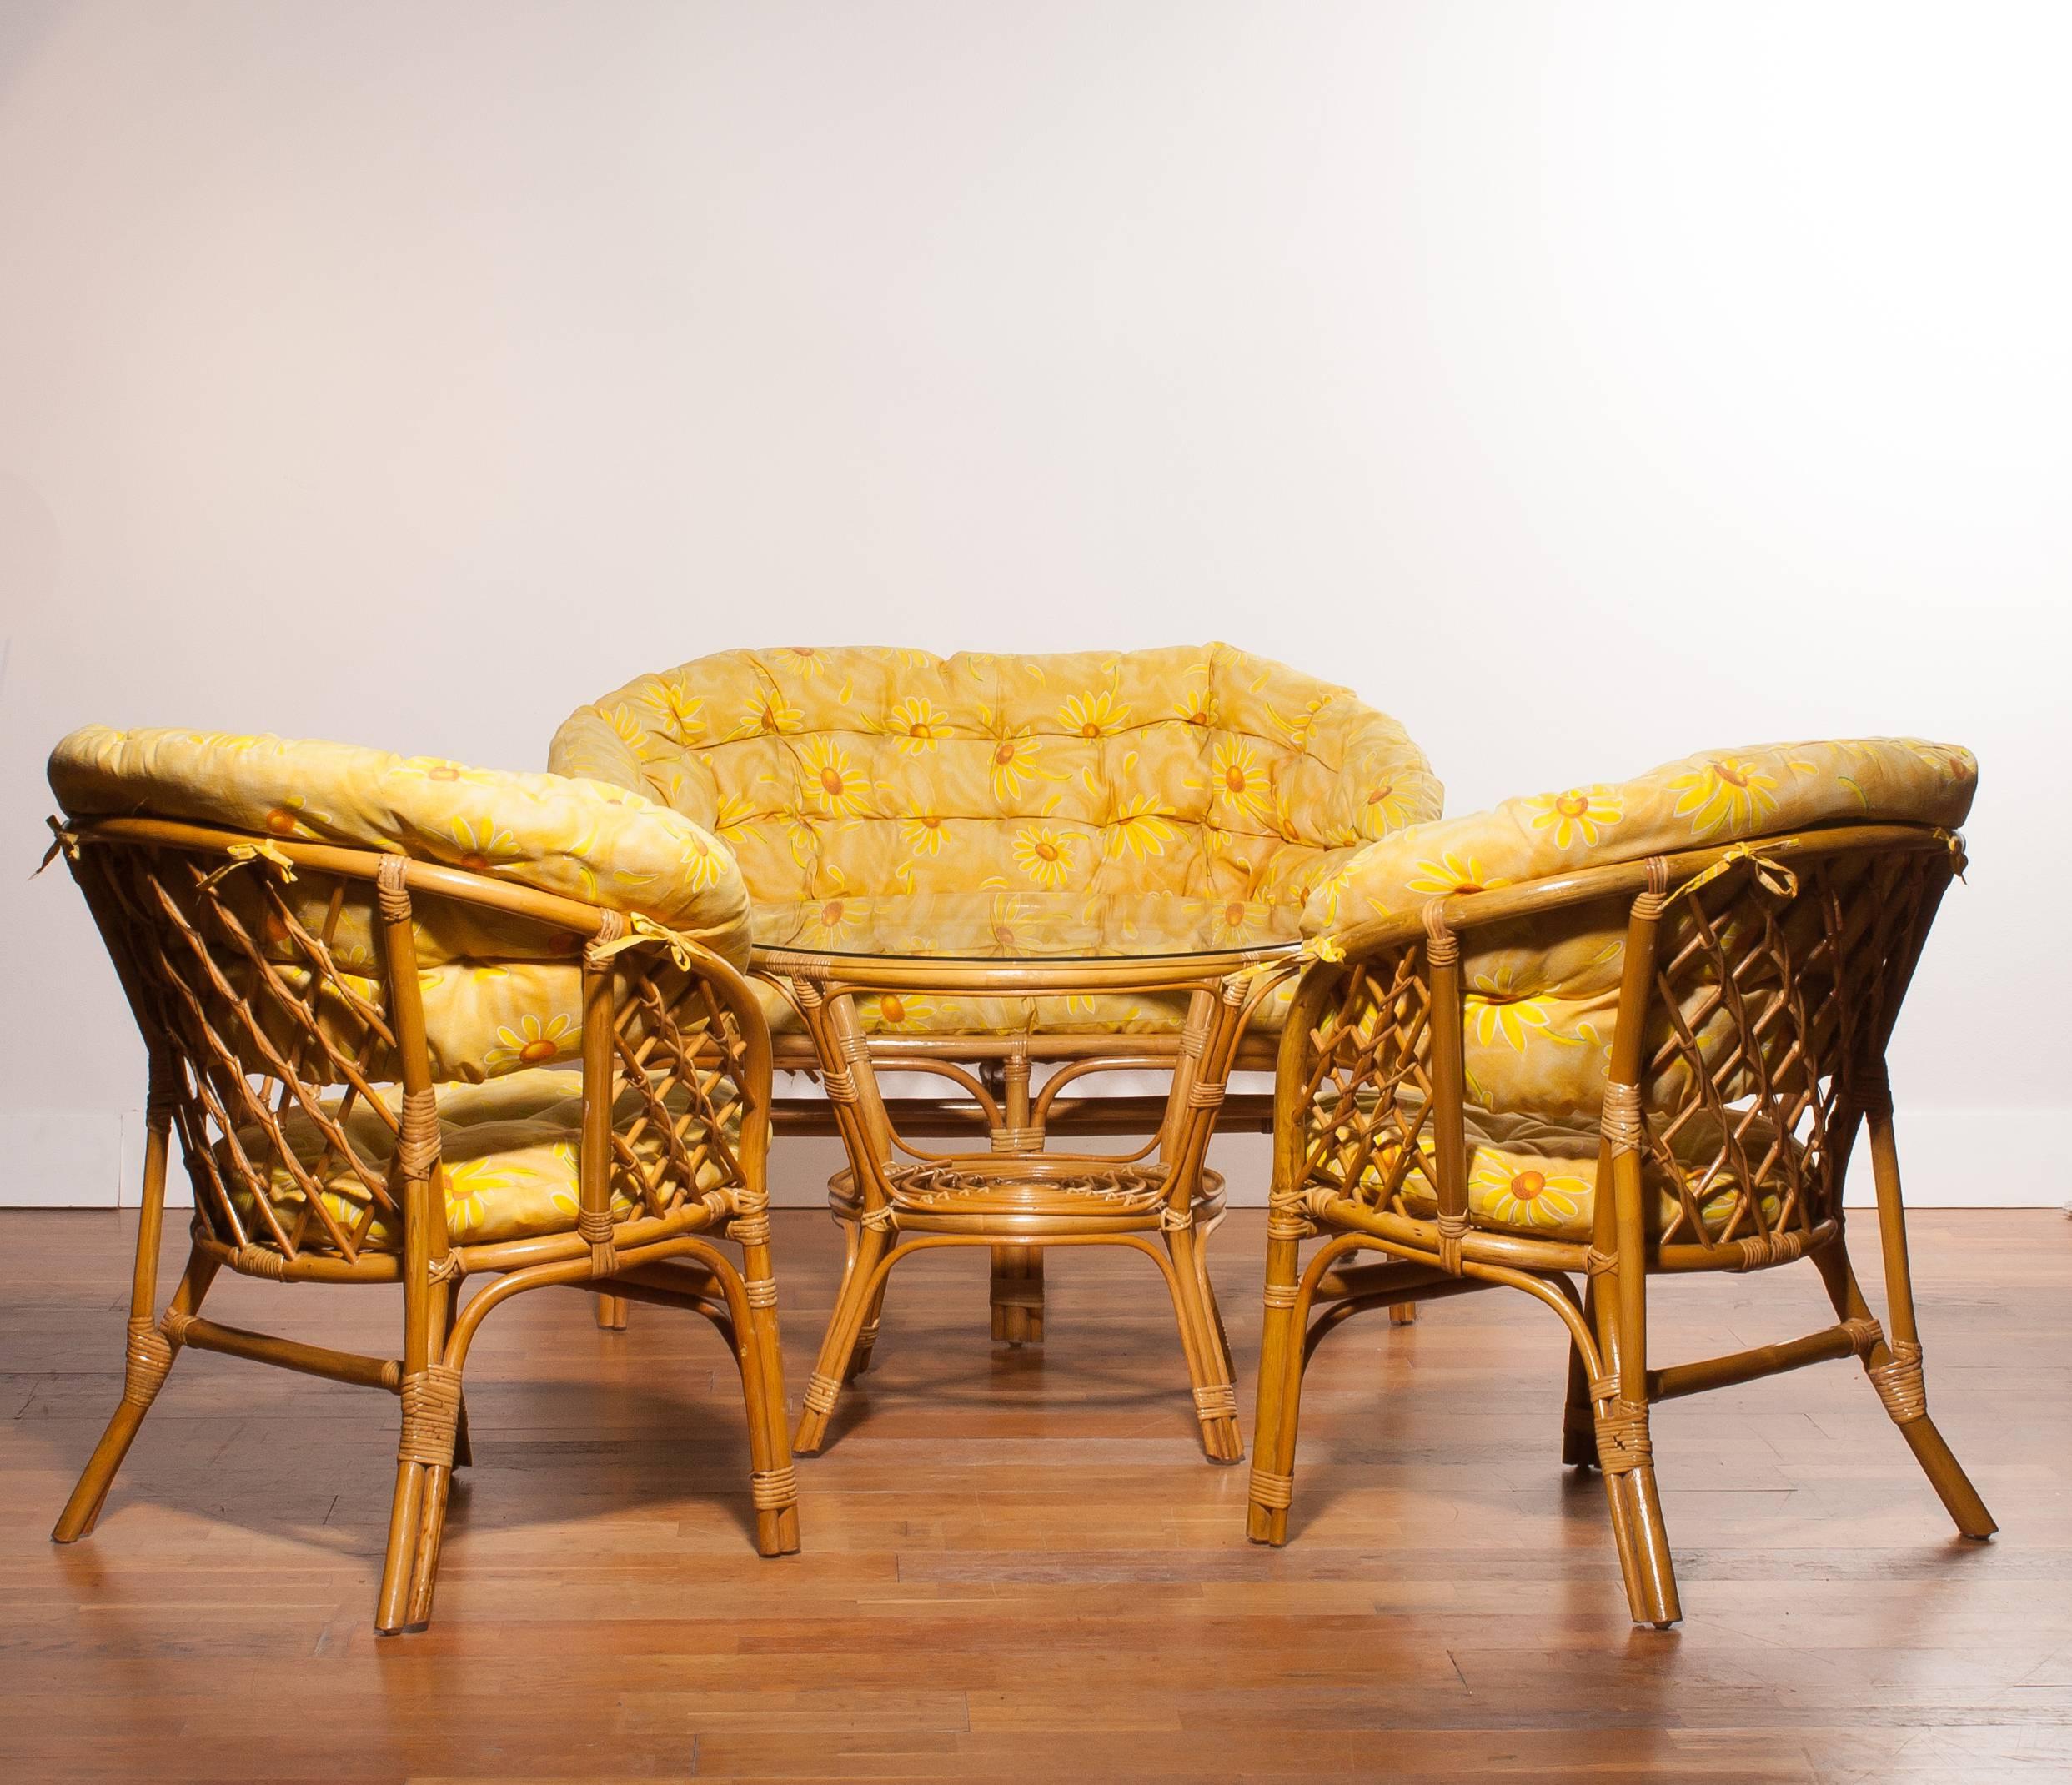 A beautiful rattan garden set consist of a two-seat sofa , two chairs with yellow cushions and a matching round table.
The set is in a very nice condition.
Period 1970s
Dimensions: Sofa - H.74 cm , W. 115 cm , D. 60 cm , Sh. 39 cm
 Chair - H. 74 cm